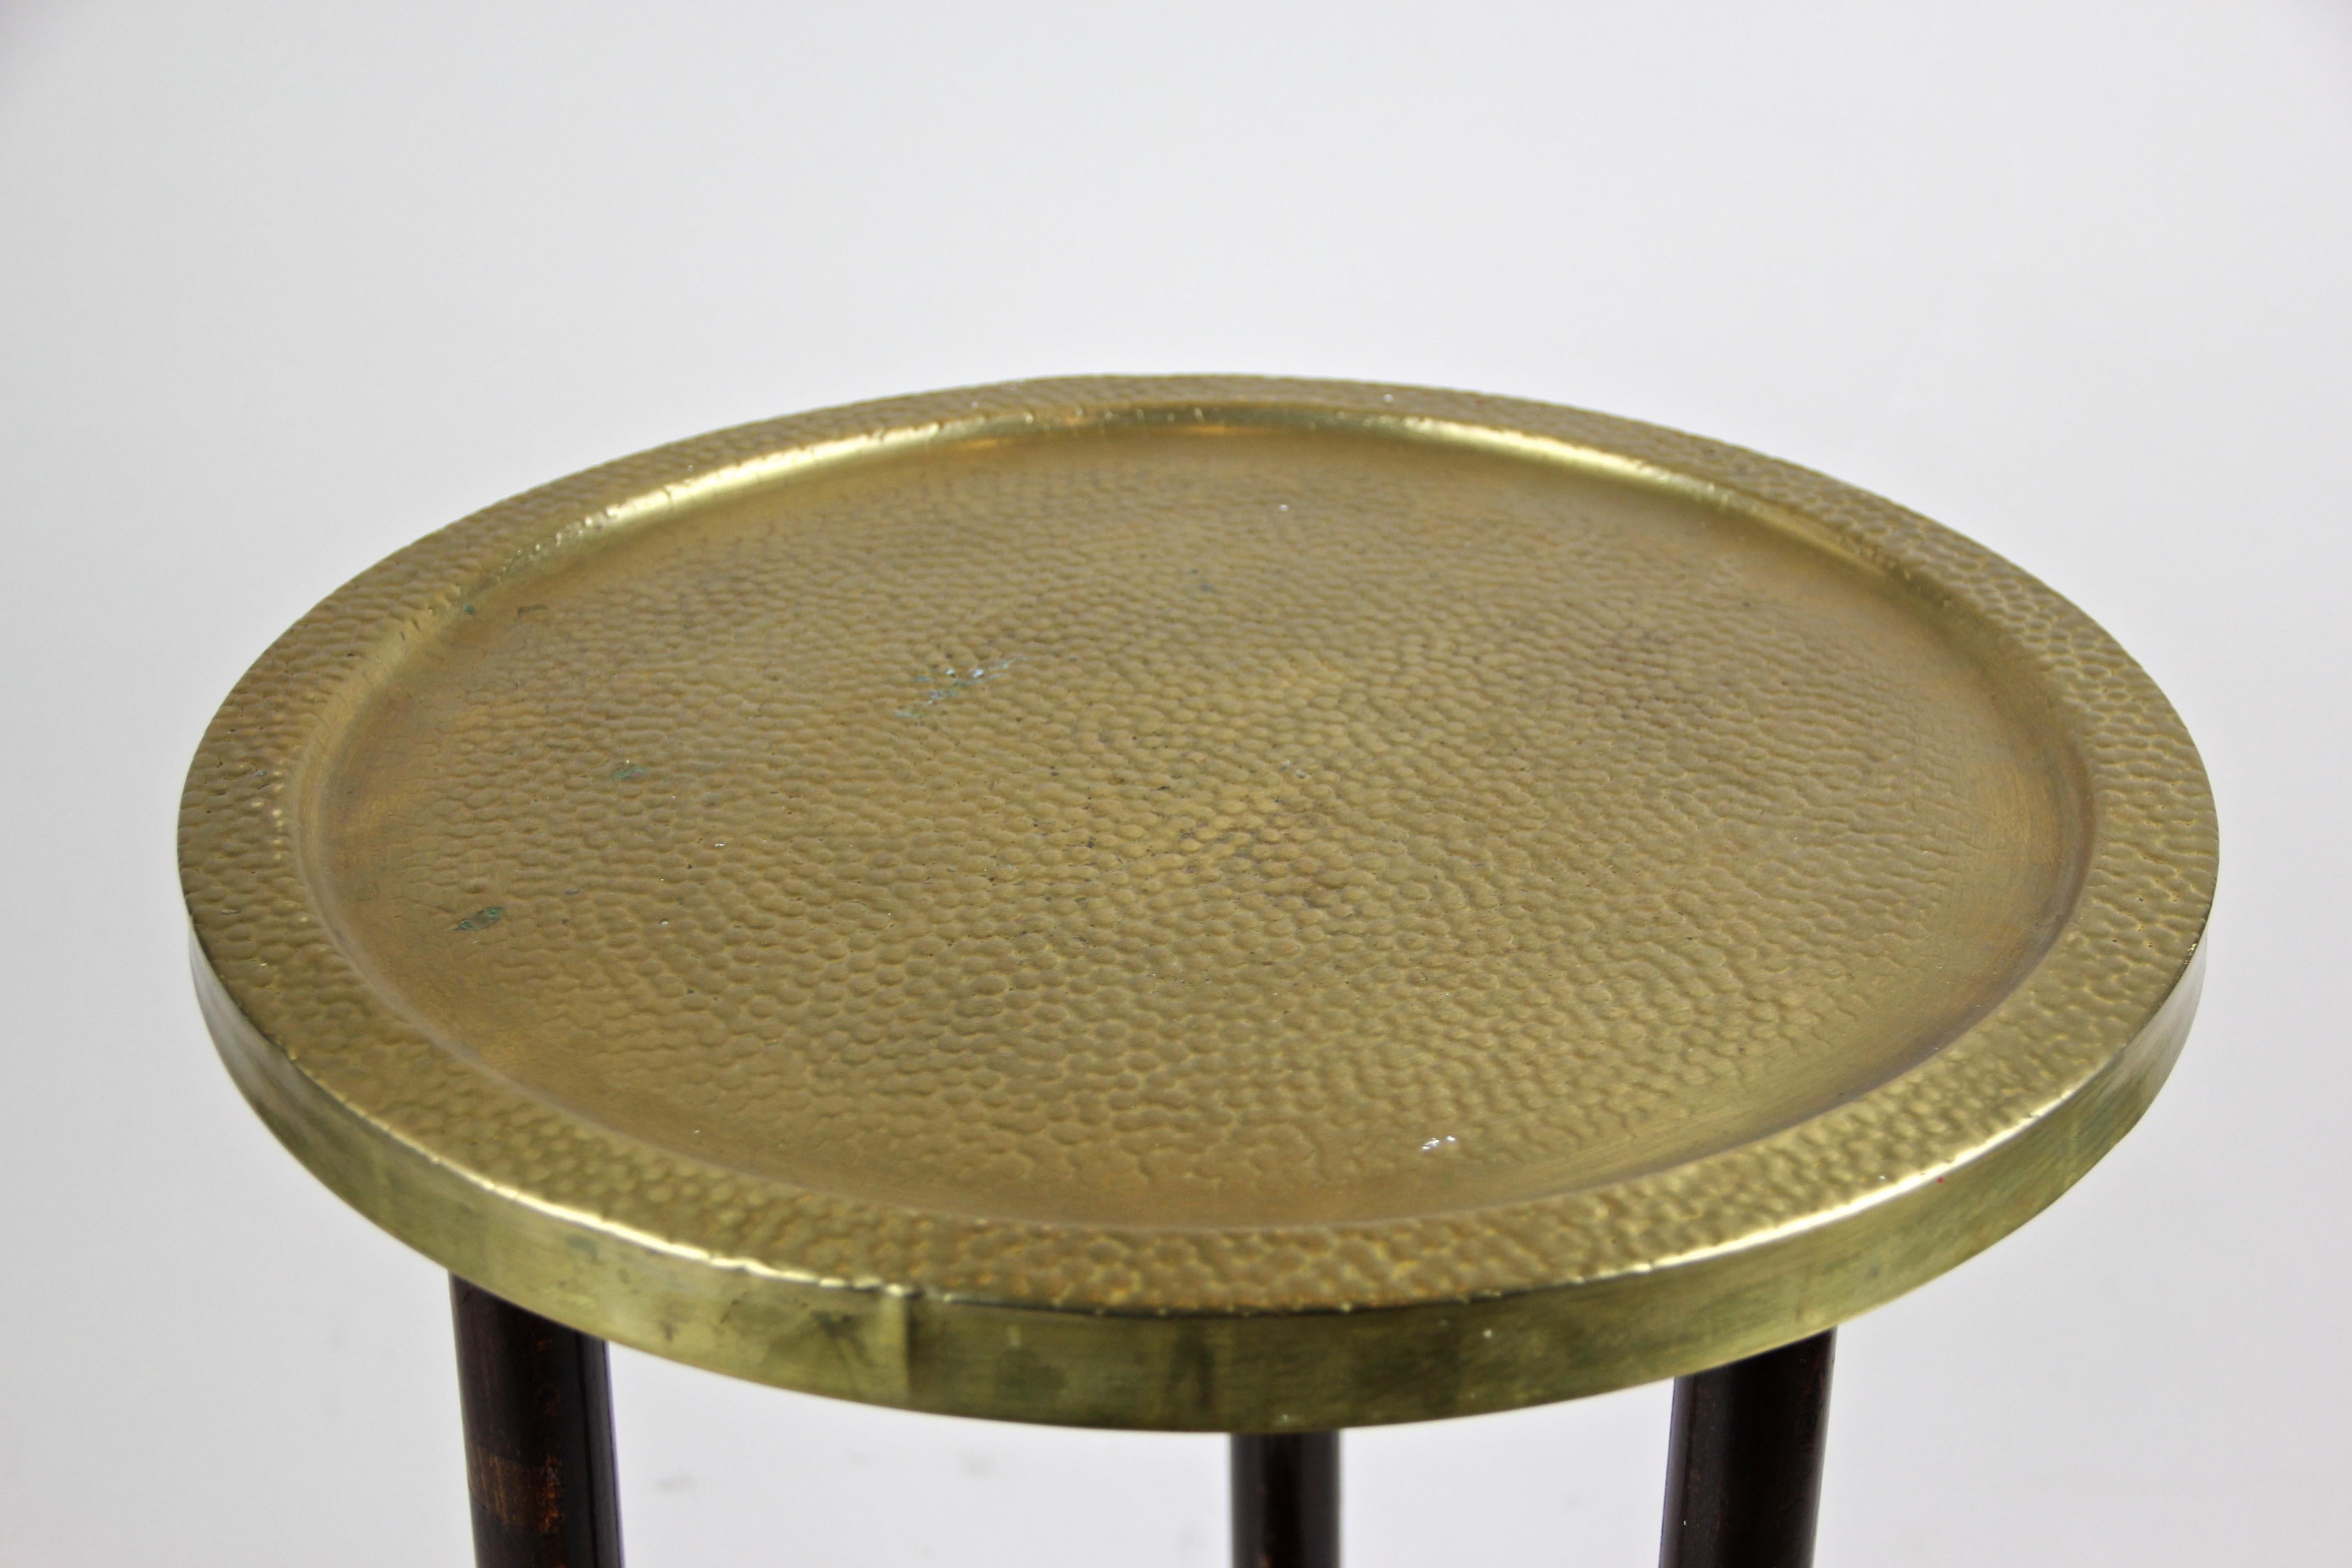 Lovely small Art Nouveau side table or Gueridon table from the period circa 1910 in Austria. This fantastic side table was made of beech and trimmed to a nut wood look. A round plate floating on three small feet and showing a glossy shellac finish,